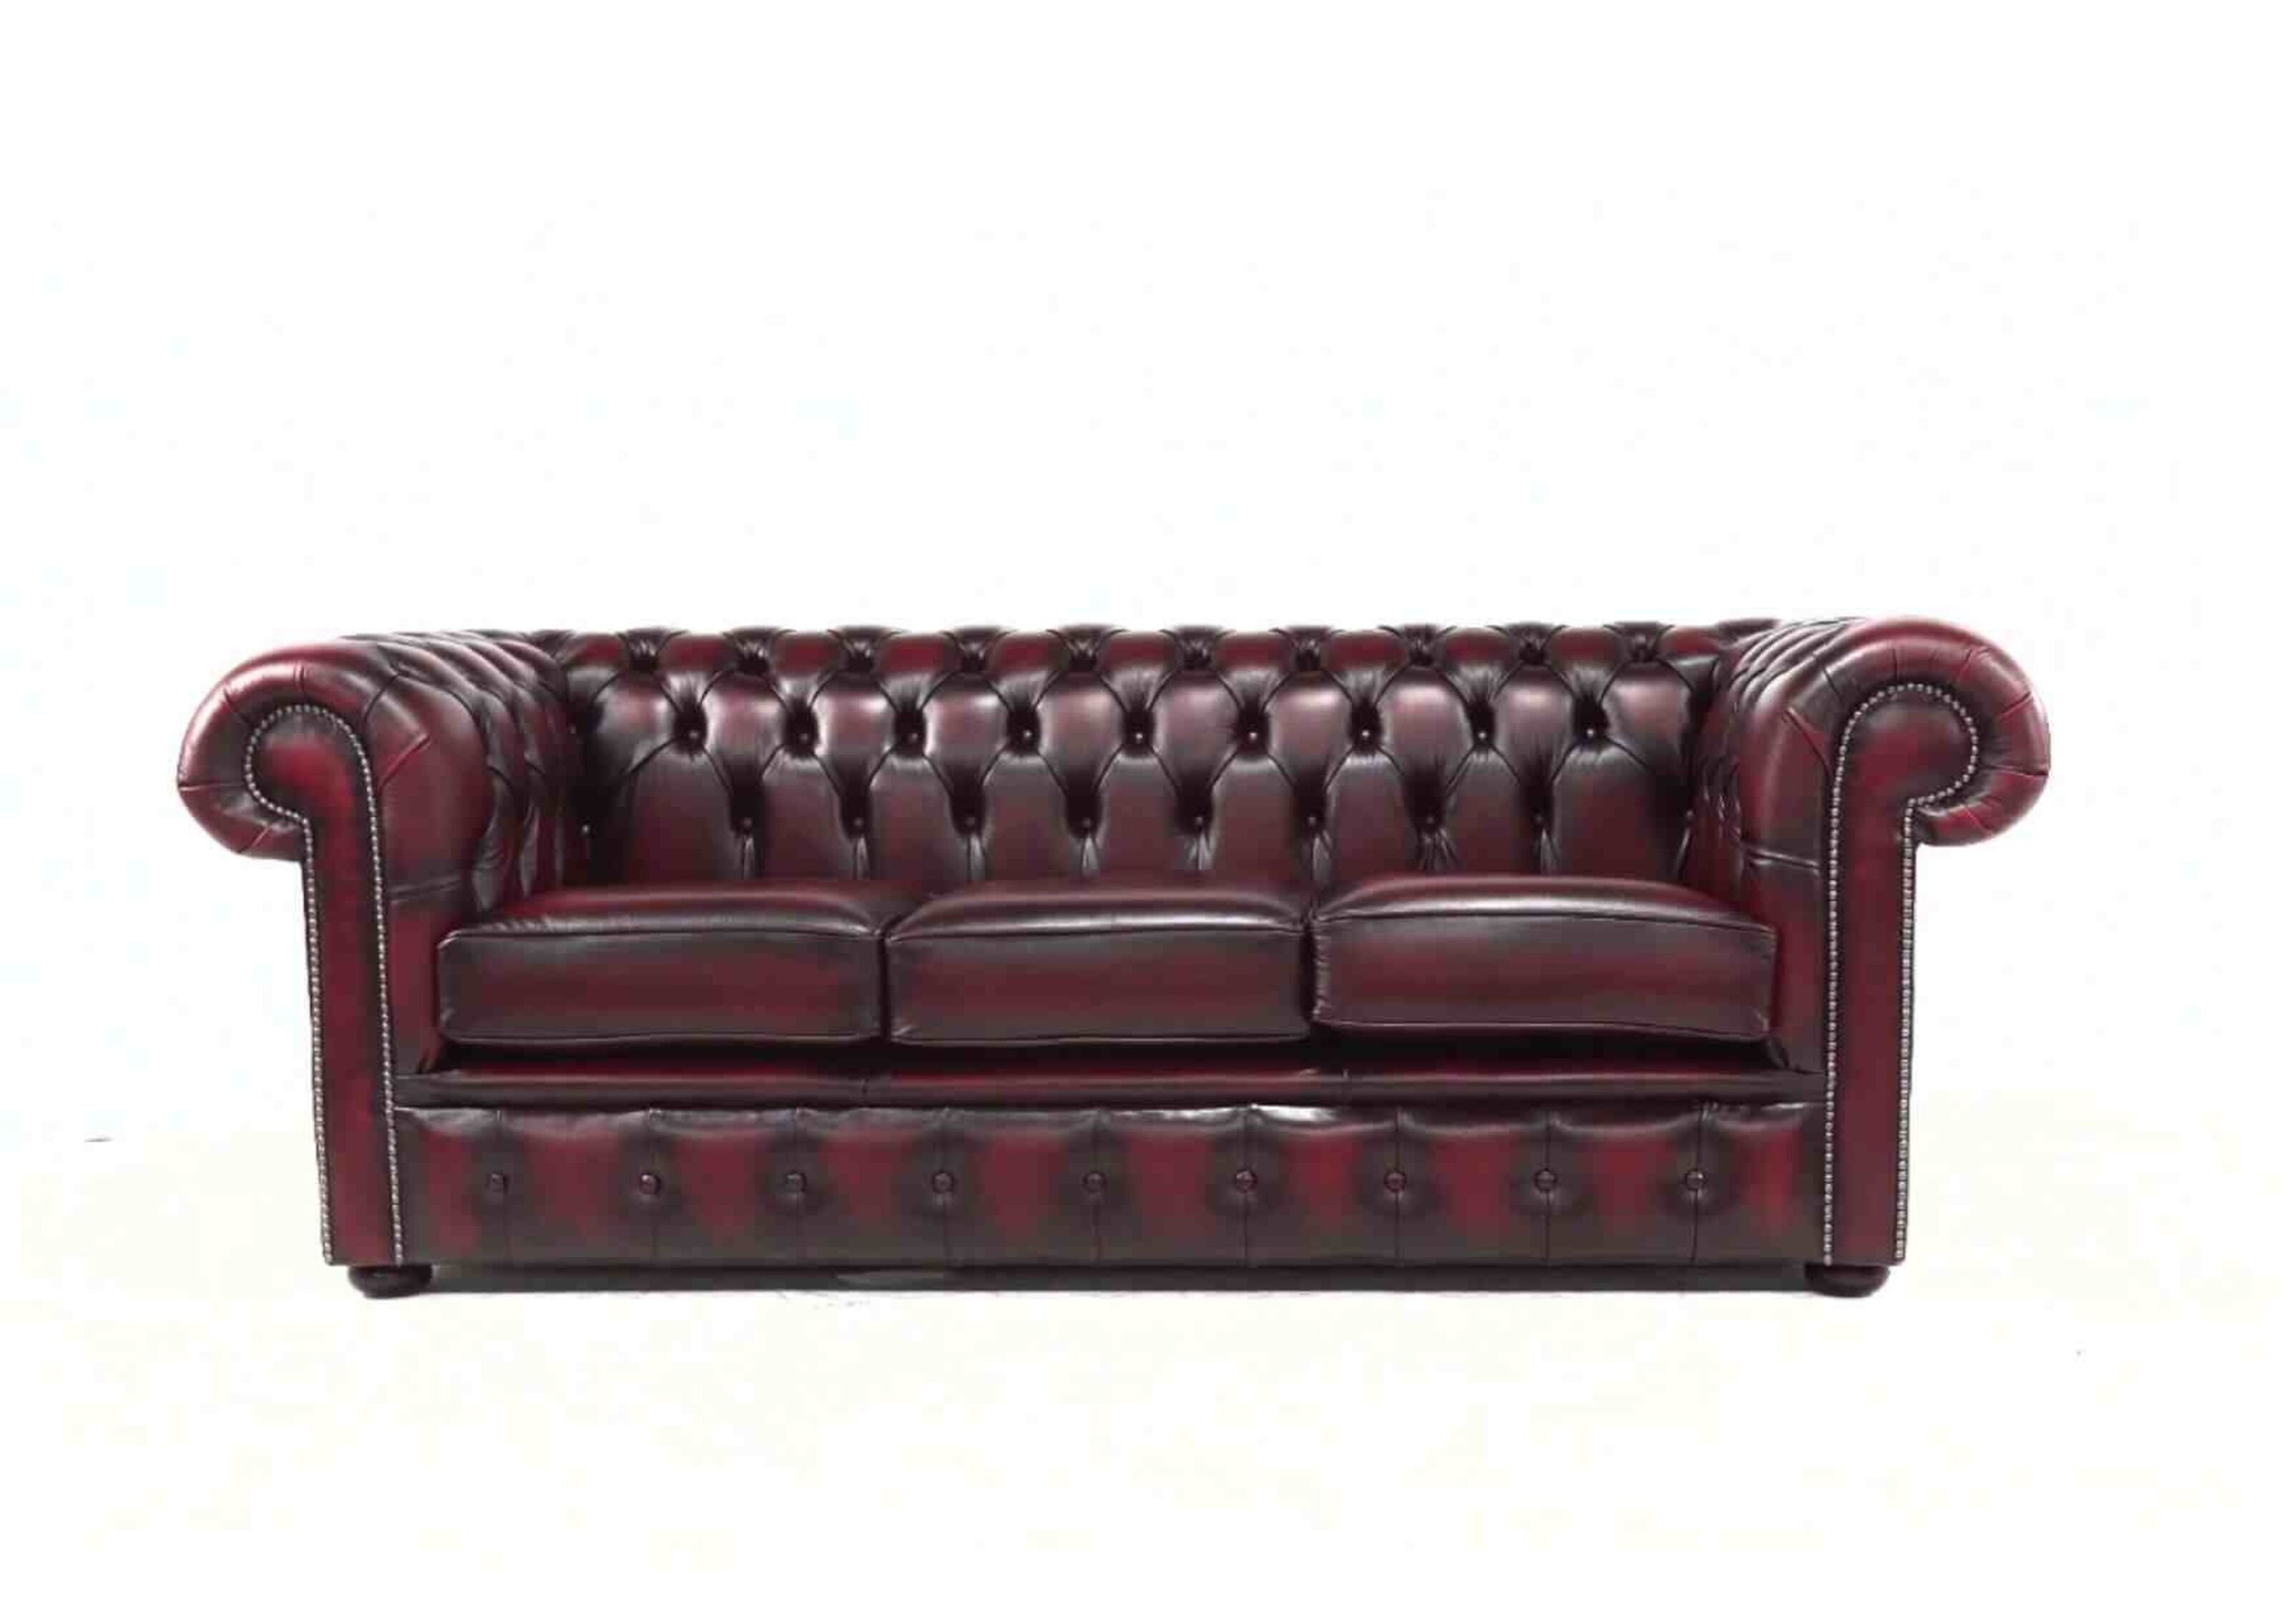 From Past to Present The Evolutionary Journey of Chesterfield Sofas  %Post Title